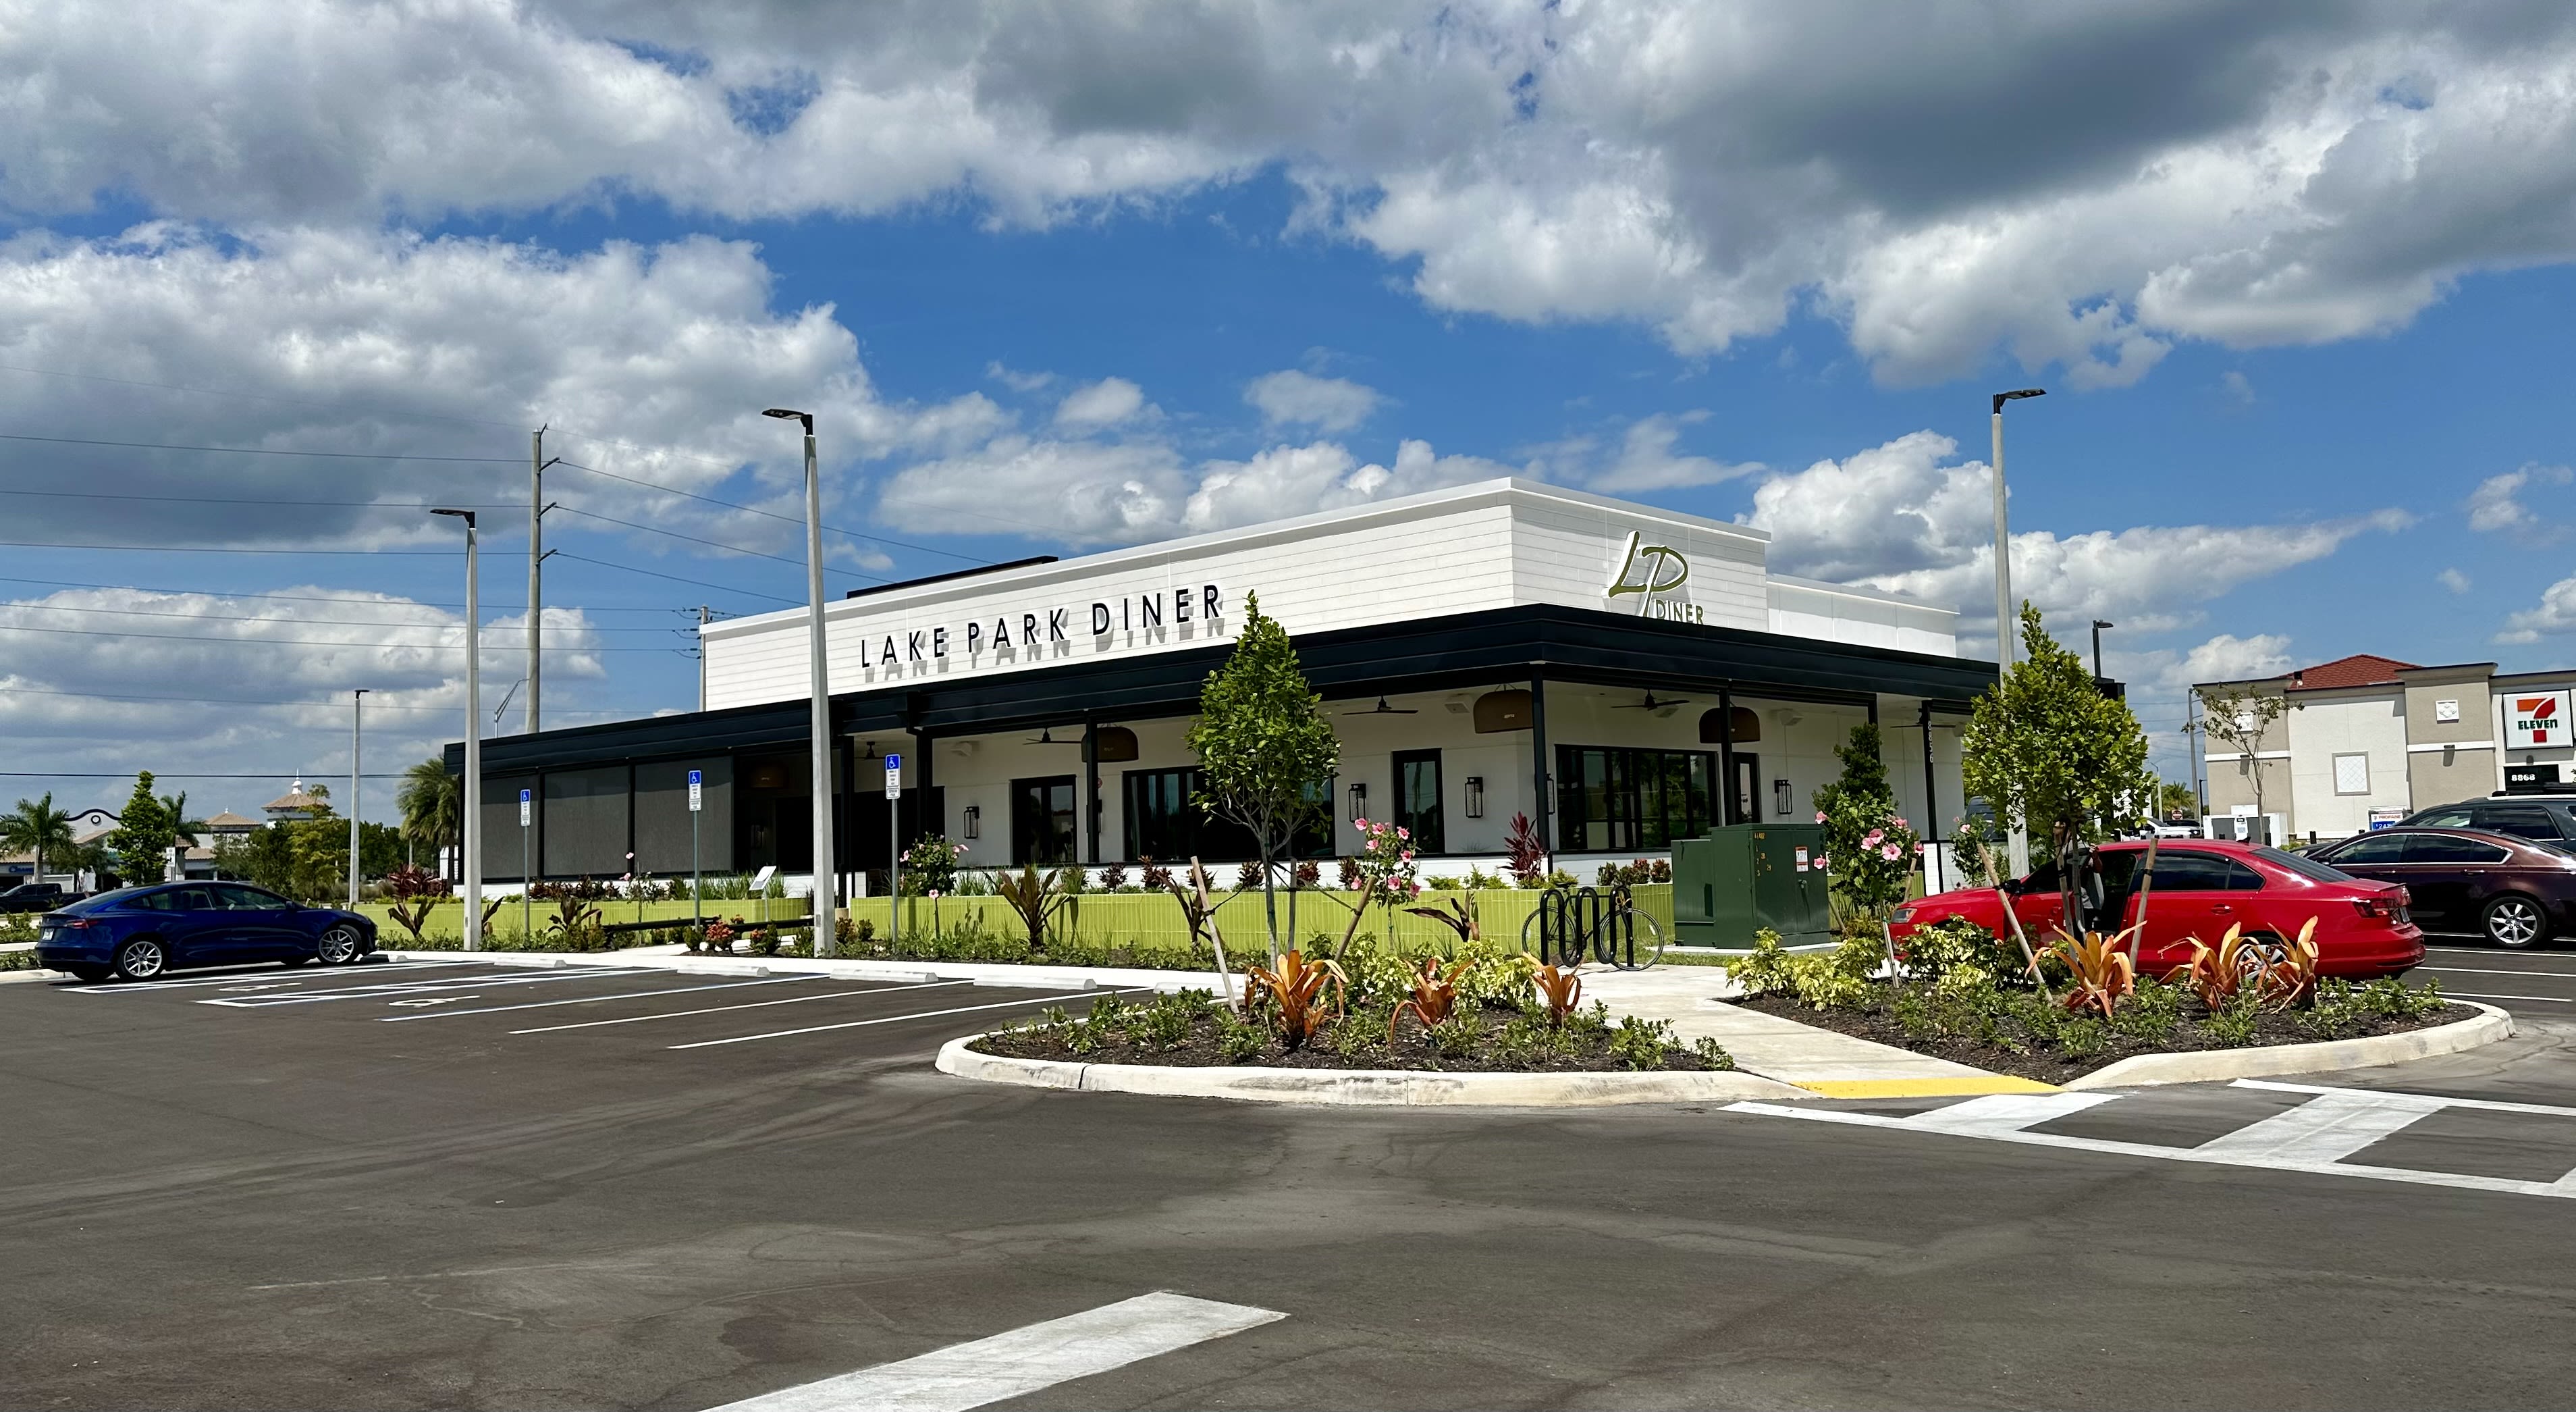 Lake Park Diner expands with Founders Square location